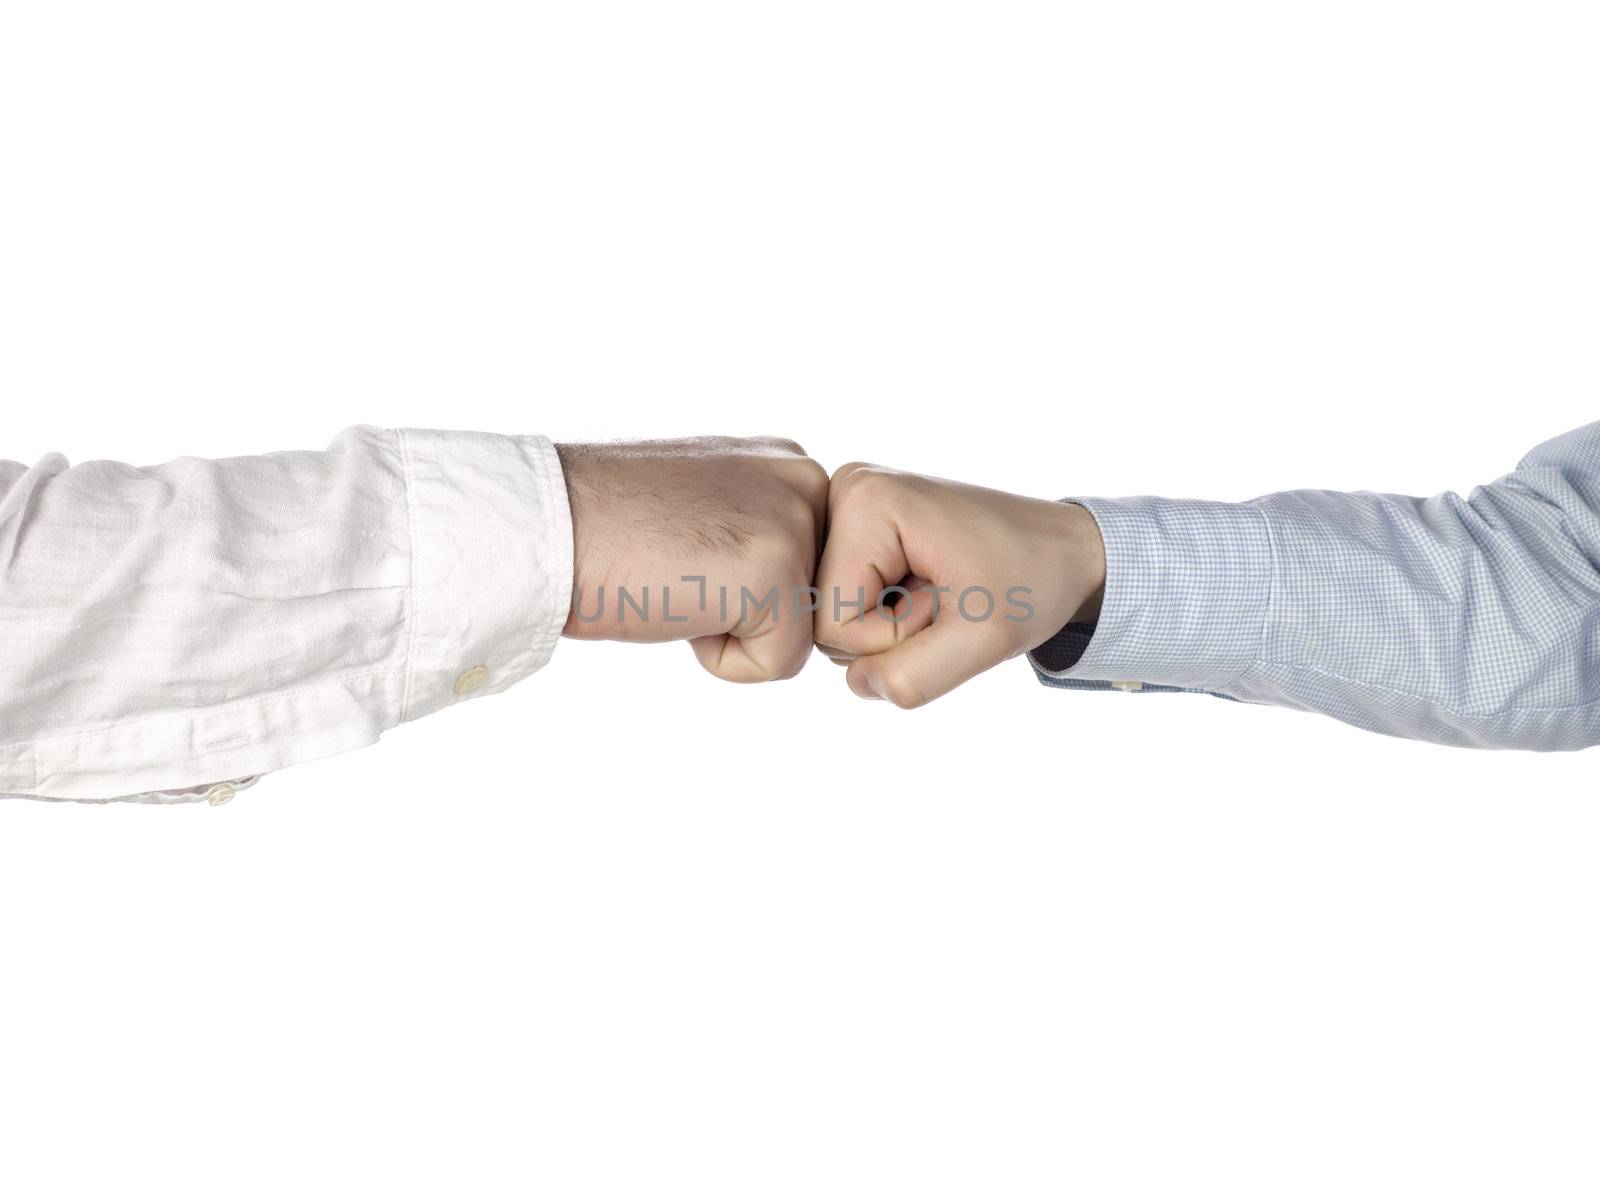 two hands doing a fist bump on white background